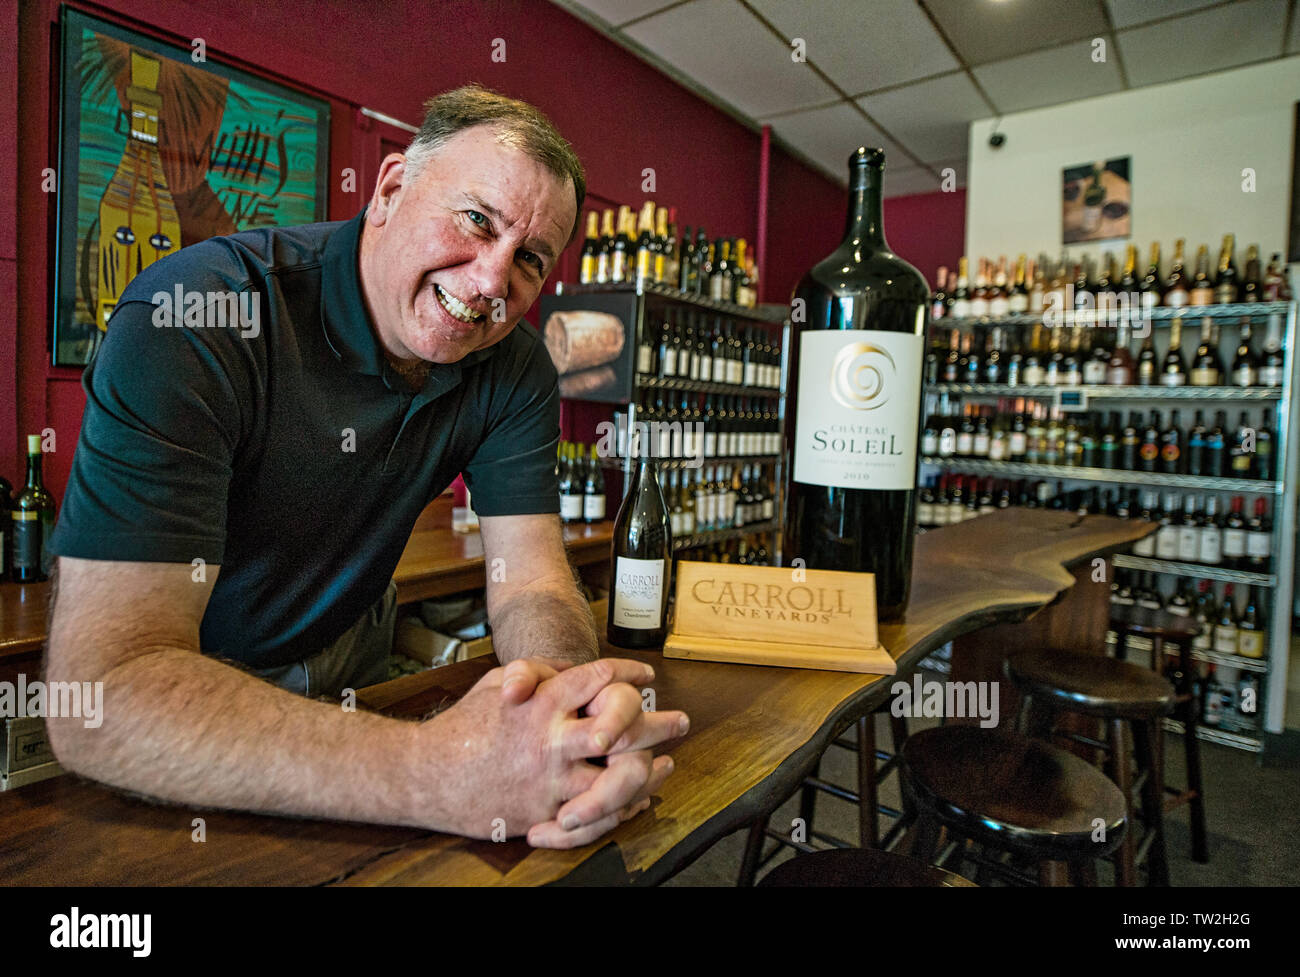 UNITED STATES - November 16. 2015: Mike Carroll poses for a photo at his shop in downtown Leesburg Virginia. The photo was taken for a feature story o Stock Photo